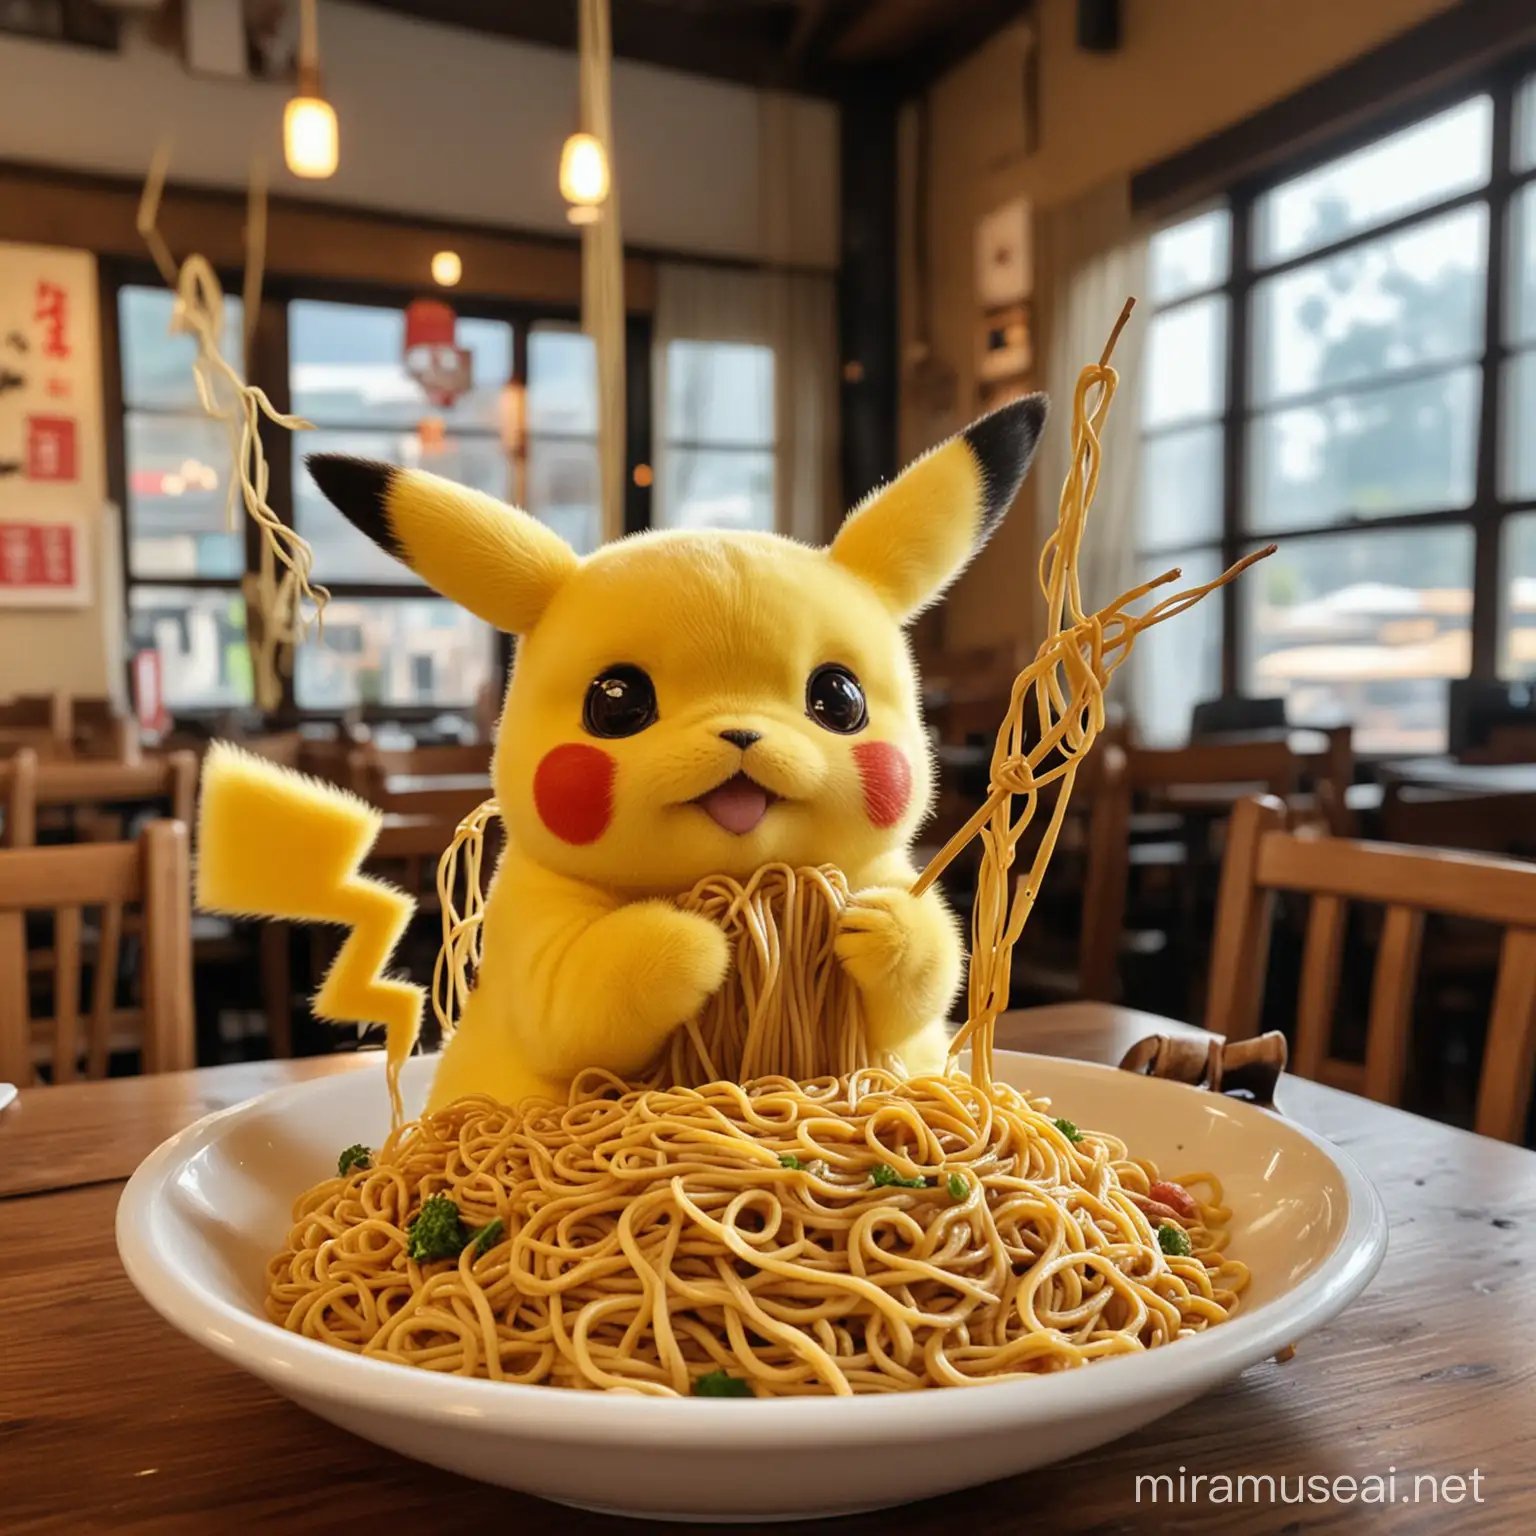 Pikachu eats long noodles with sticks in the restaurant